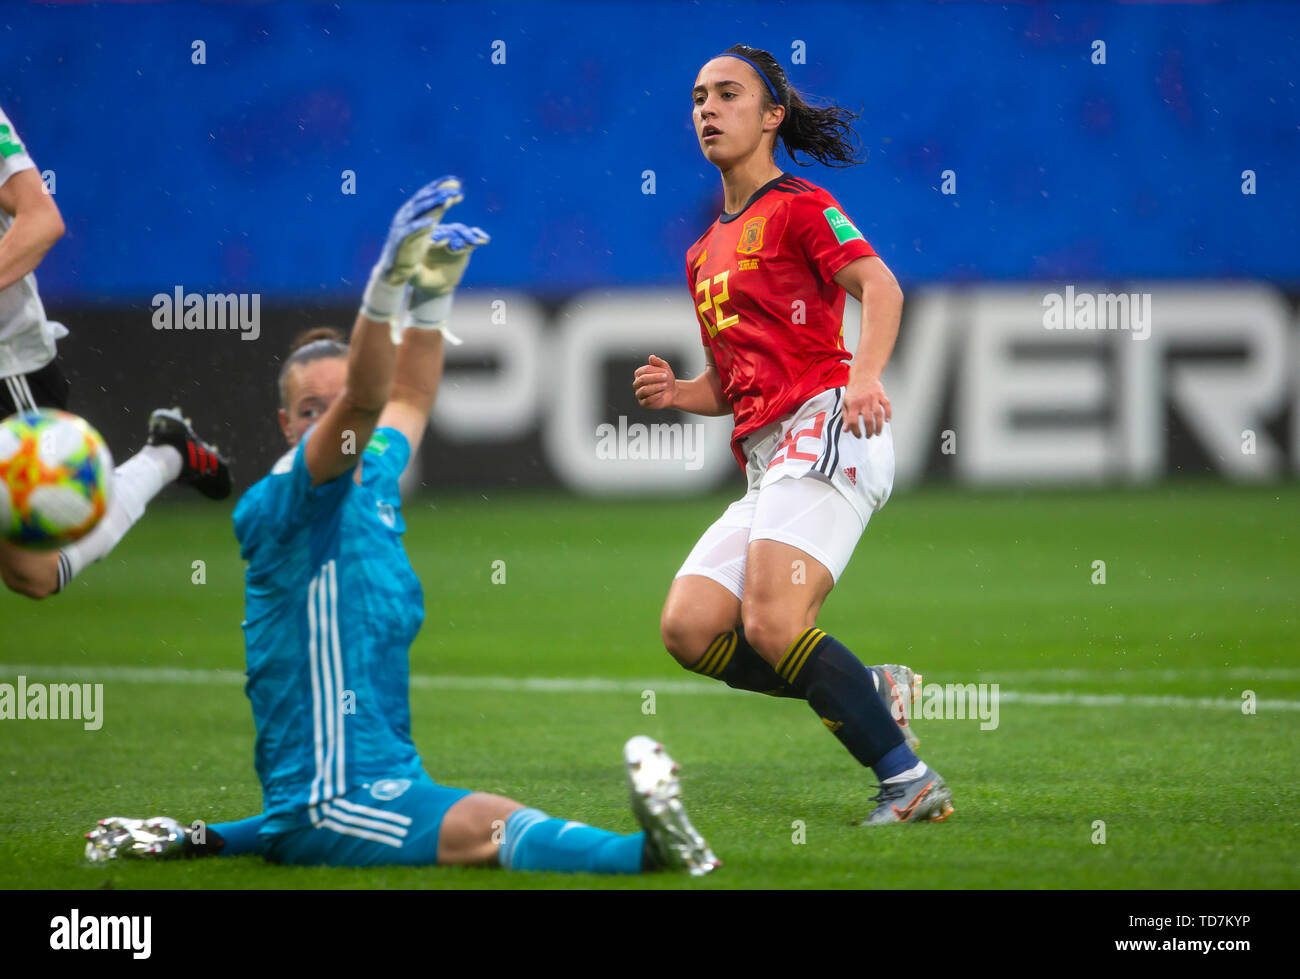 Valenciennes, Frankreich. 12th June, 2019. France, Valenciennes, Stade du Hainaut, 12.06.2019, Football - FIFA Women's World Cup - Germany - Spain Credit: vl goalkeeper Almuth Schult (Germany, 1 #) and Nahikari Gracia (Spain, # 22) with the chance to lead | usage worldwide/dpa/Alamy Live News Stock Photo